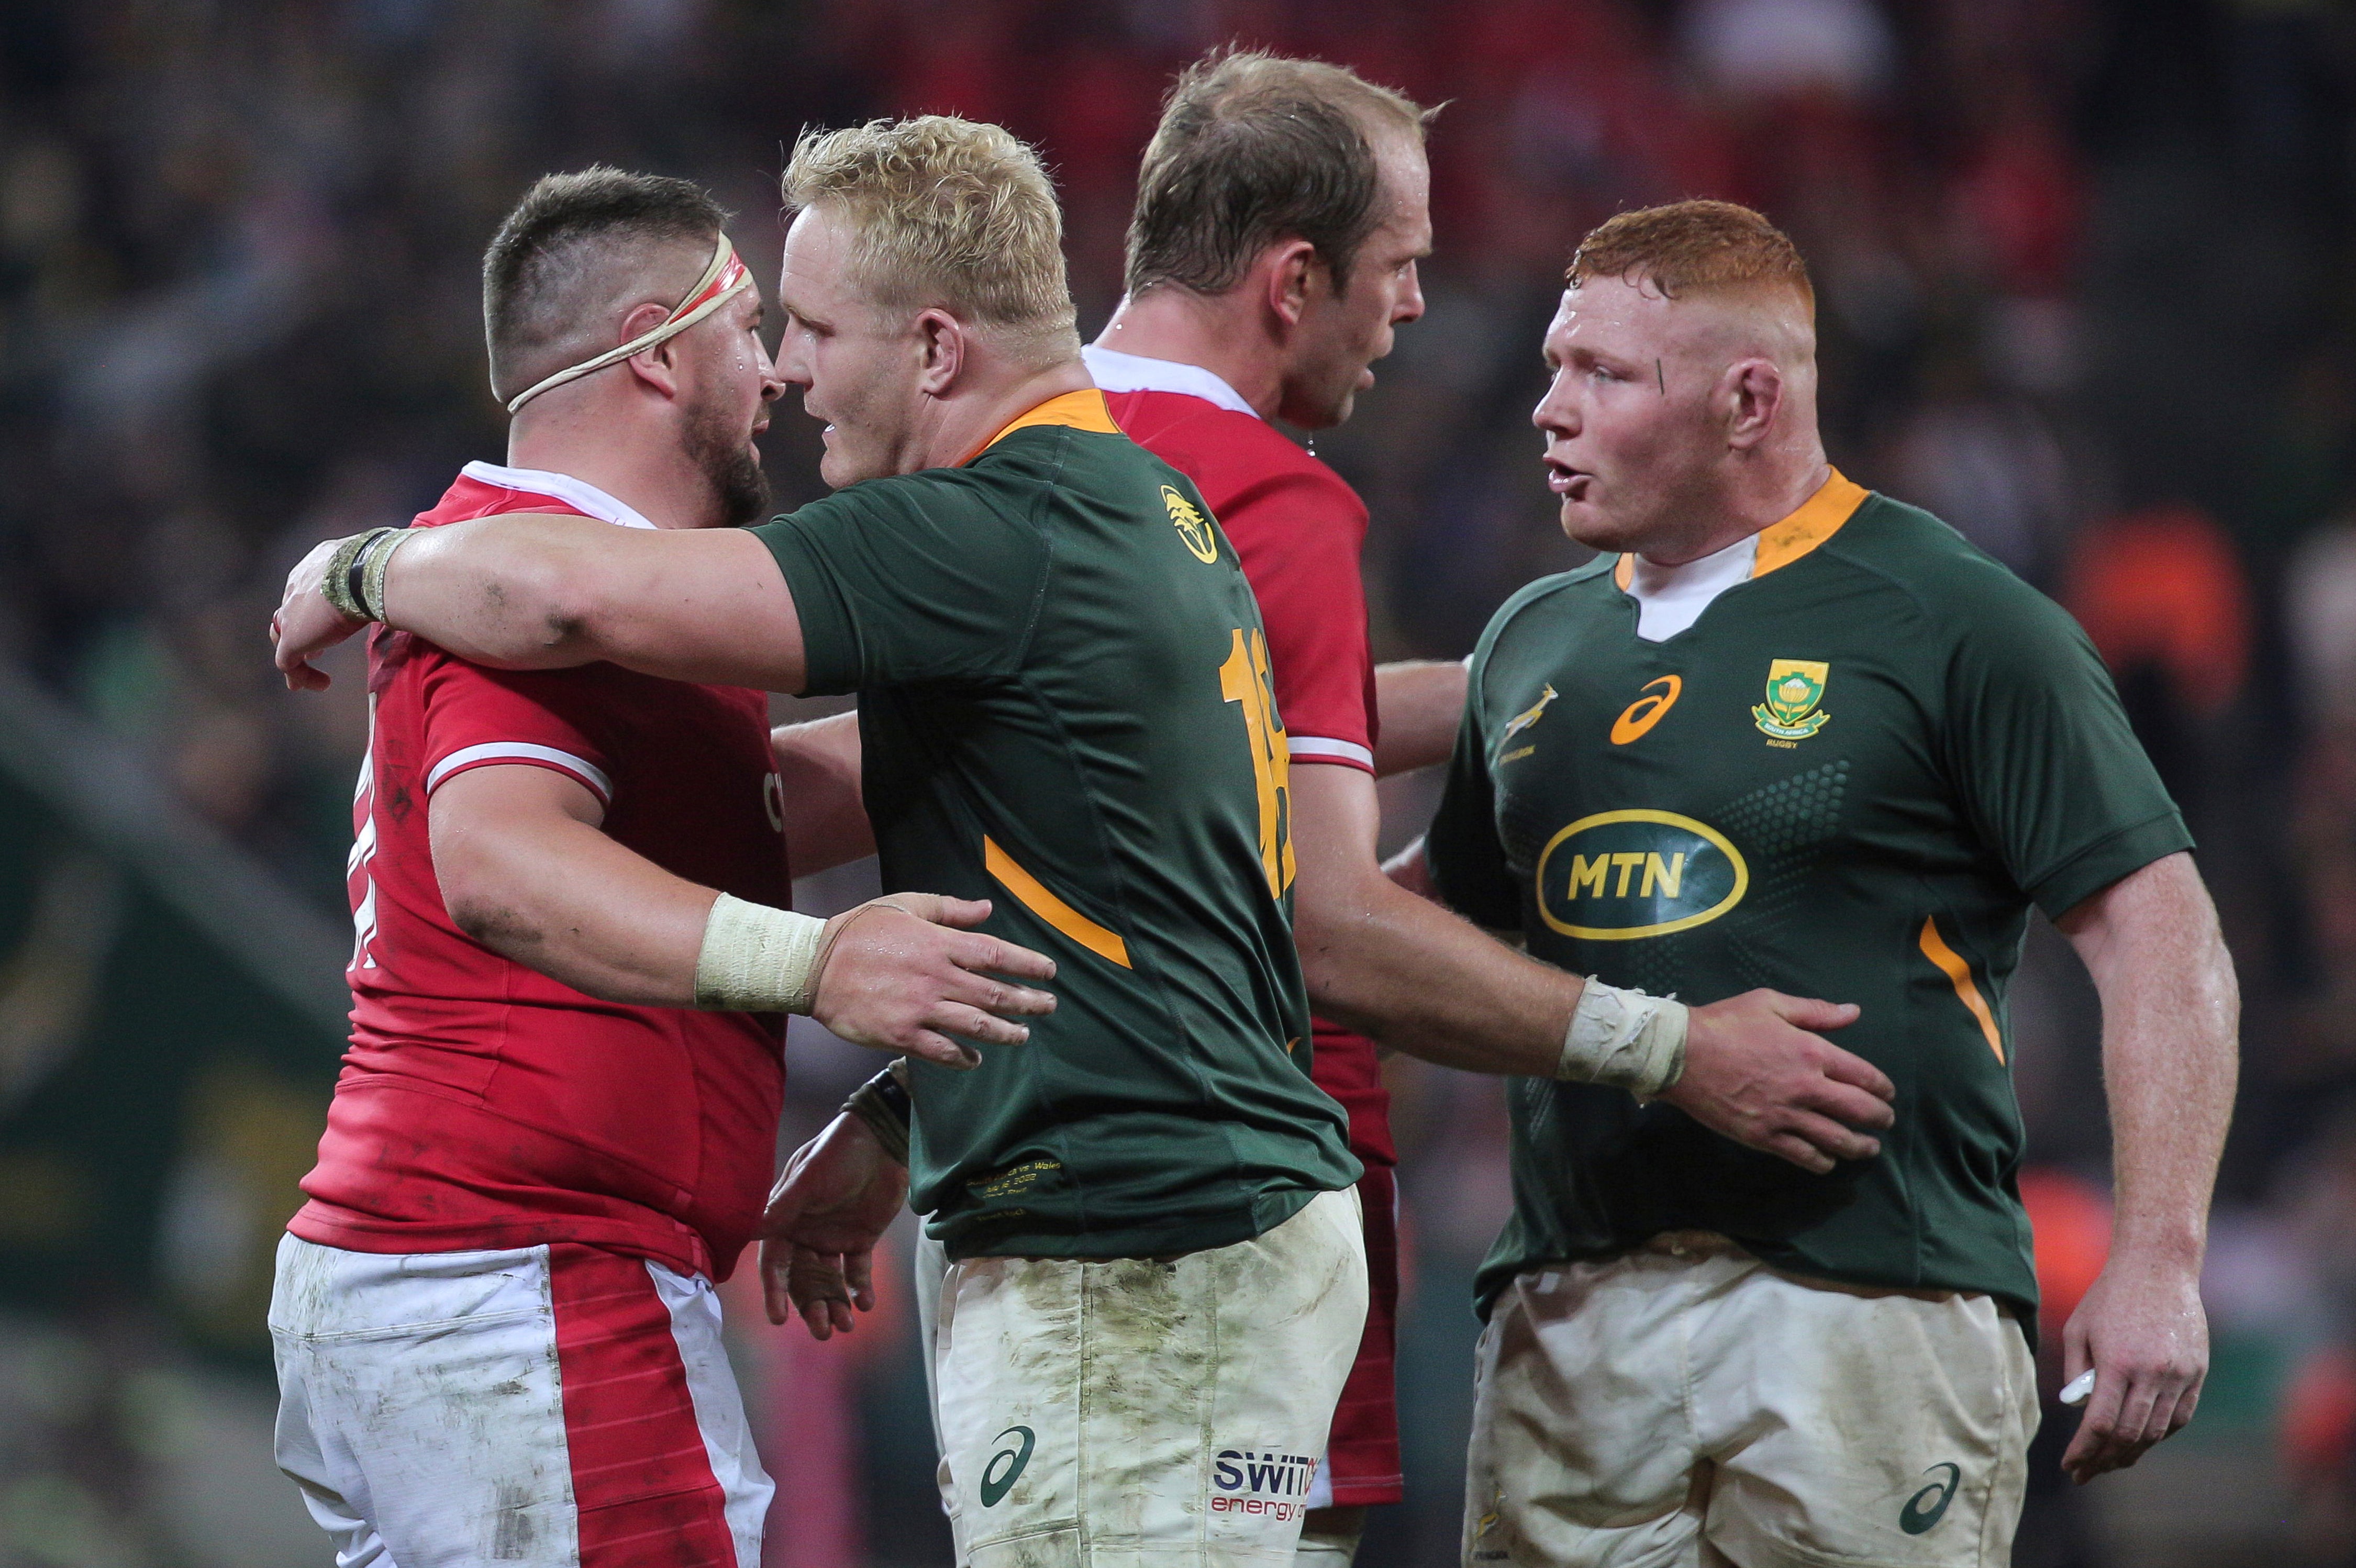 Wales and South Africa players embrace at the end of the hard-fought series (Halden Krog/AP).